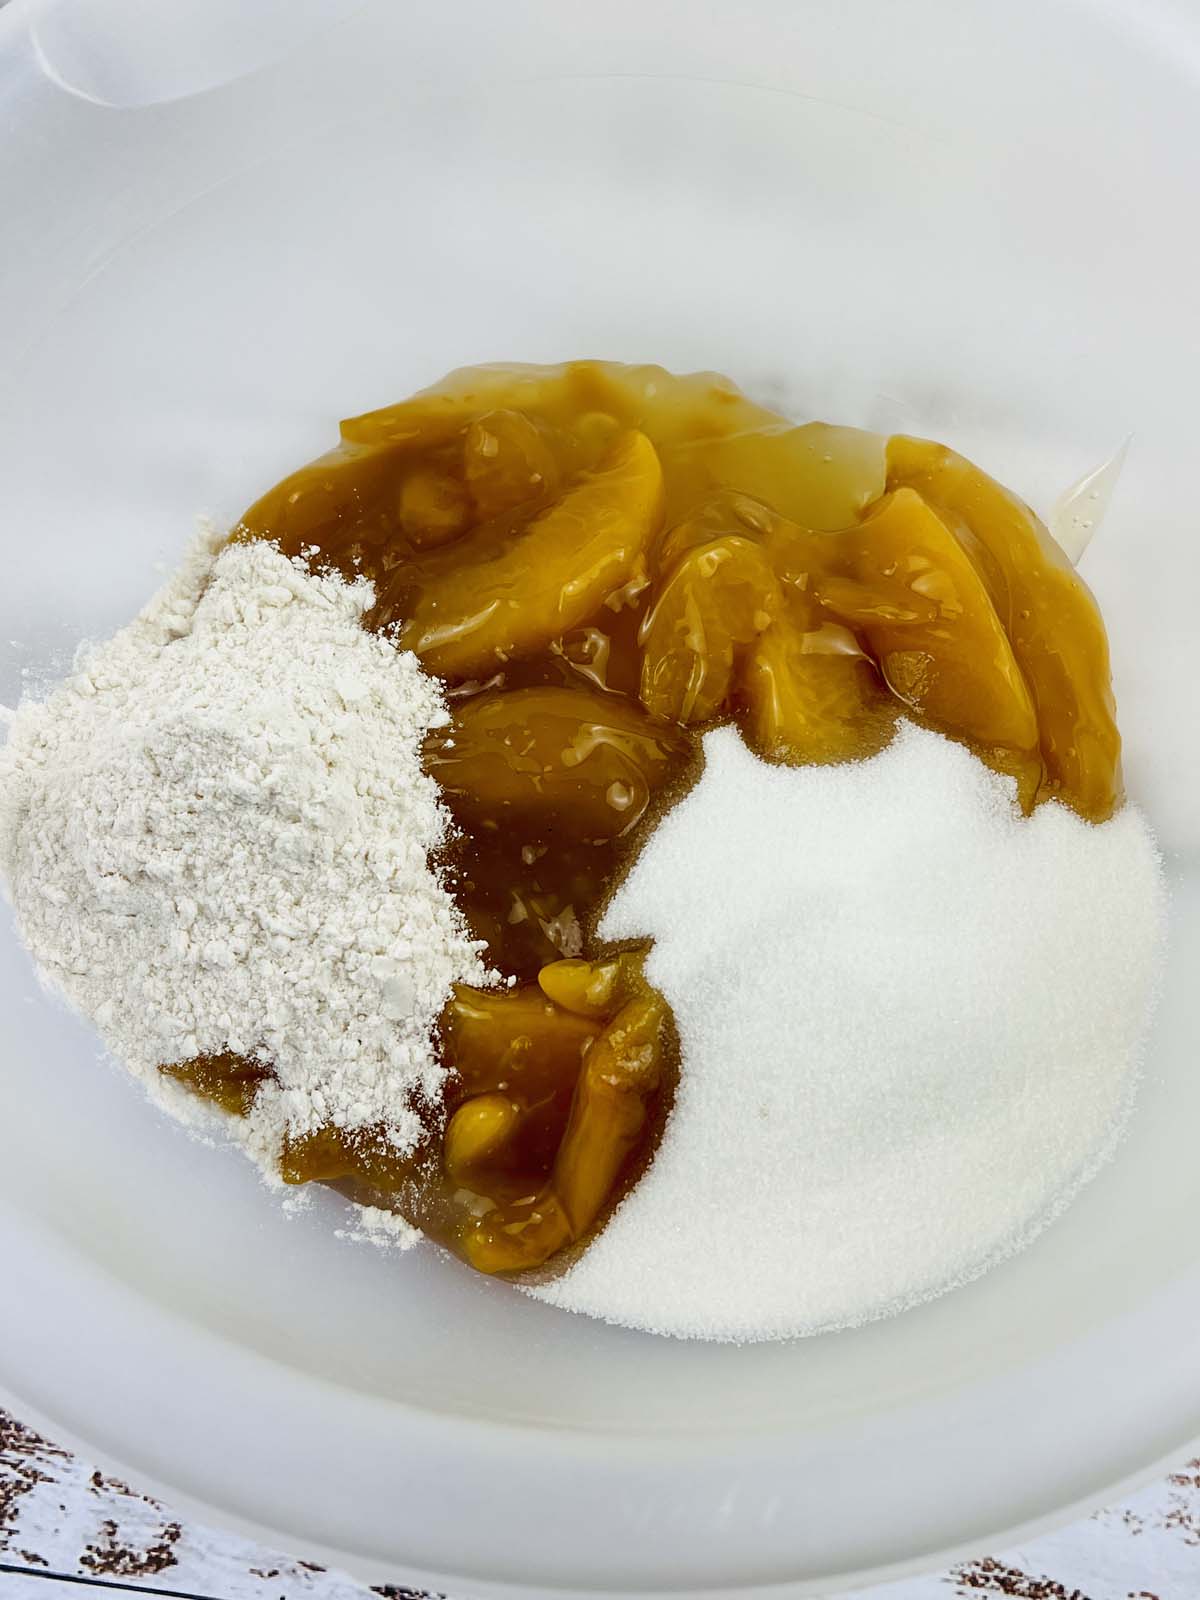 Peach filling, flour and sugar in a mixing bowl.